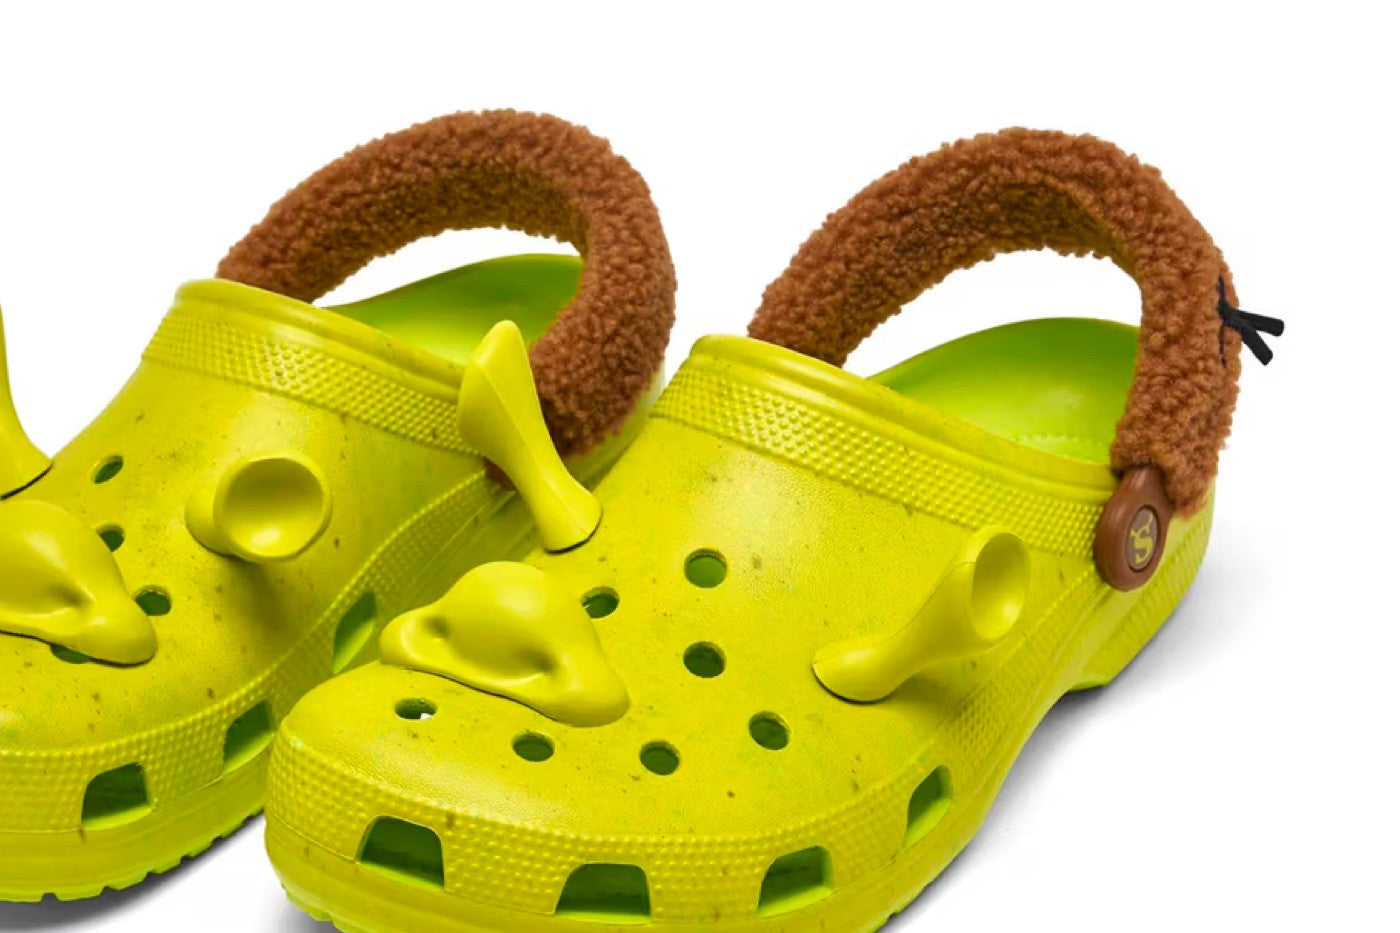 The Shrek x Crocs Classic Clog is the Collab You Never Knew You Needed